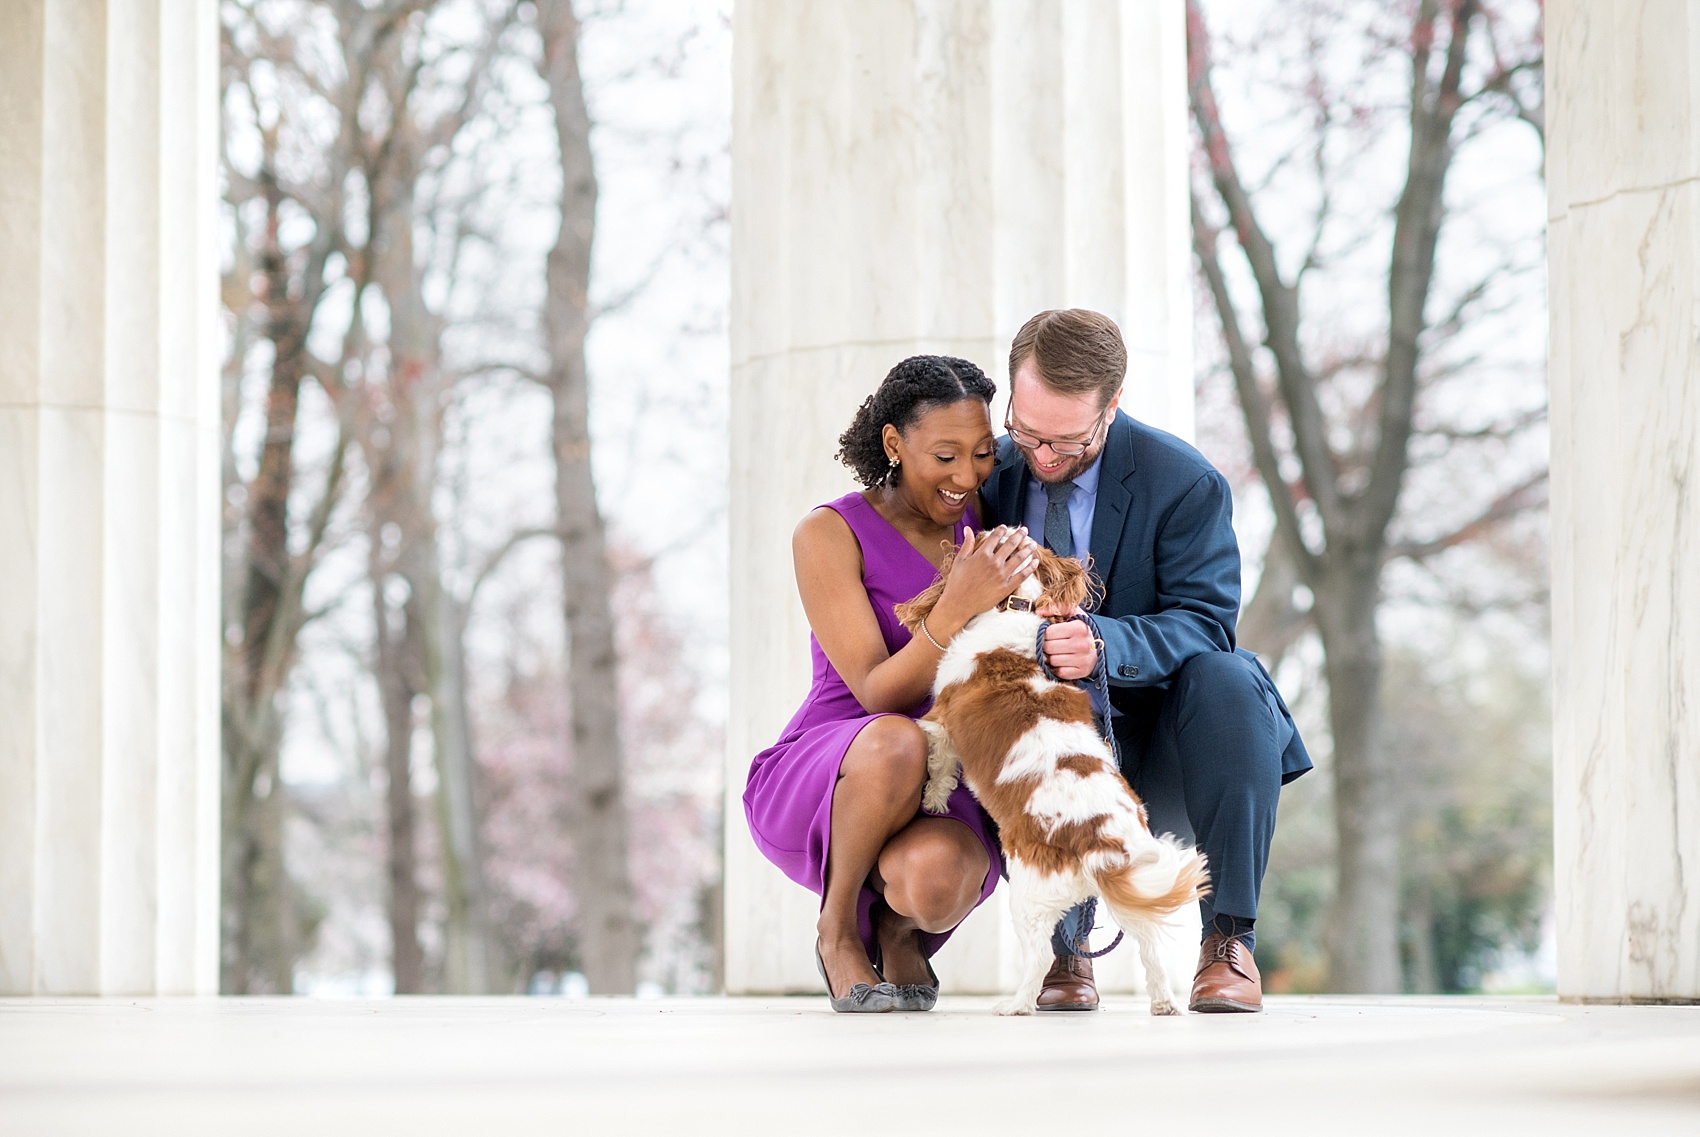 DC Cherry Blossoms Engagement Photos by Mikkel Paige Photography. Spring flowers around the MLK memorial and Tidal Basin at the nation's Capitol with a couple and their King Charles Spaniel dog. #DCCherryBlossoms #CherryBlossoms #EngagementPhotos #SpringEngagementPhotos #CherryBlossomsEngagementPhotos